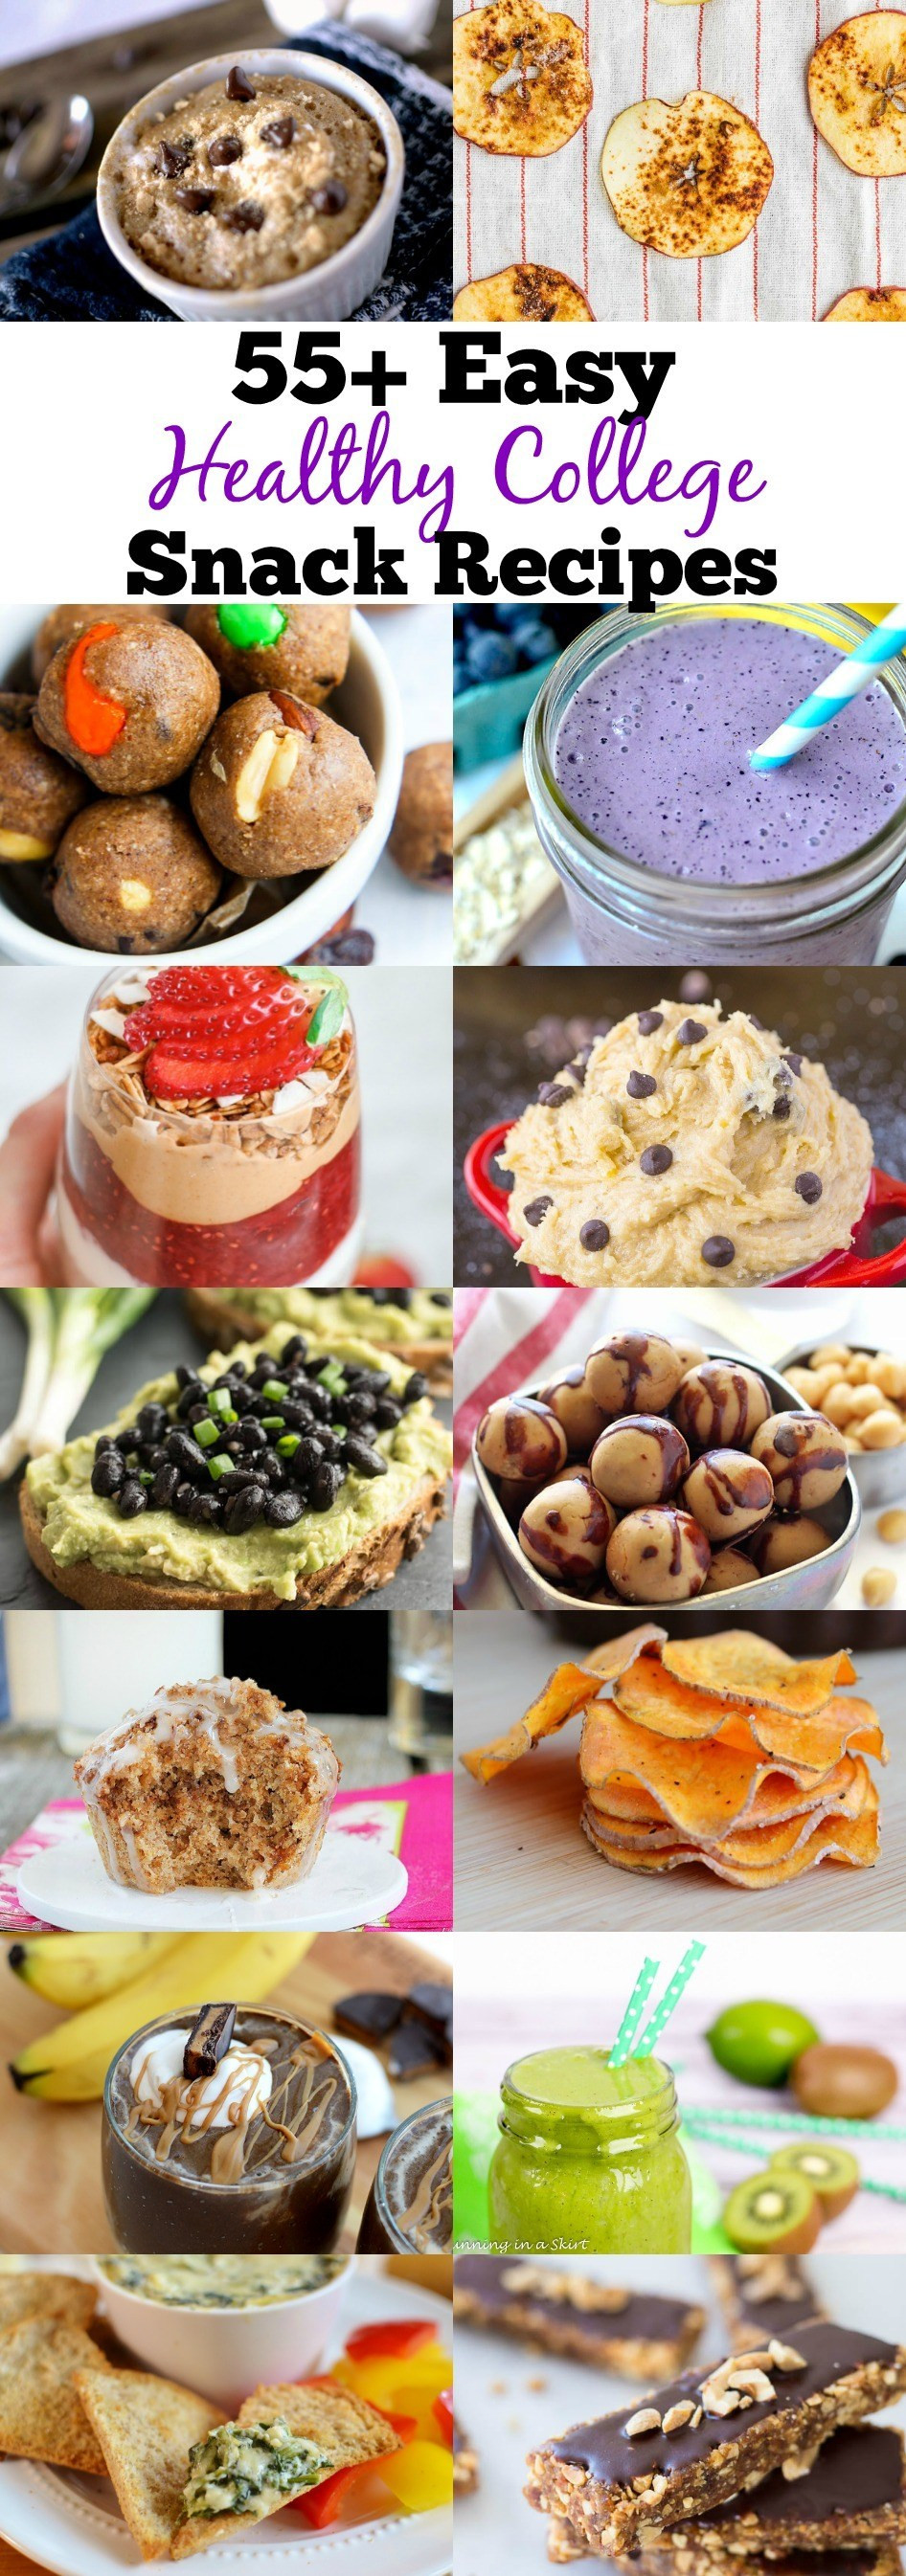 Healthy Dorm Snacks
 55 Healthy College Snack Recipes That Can Be Made In a